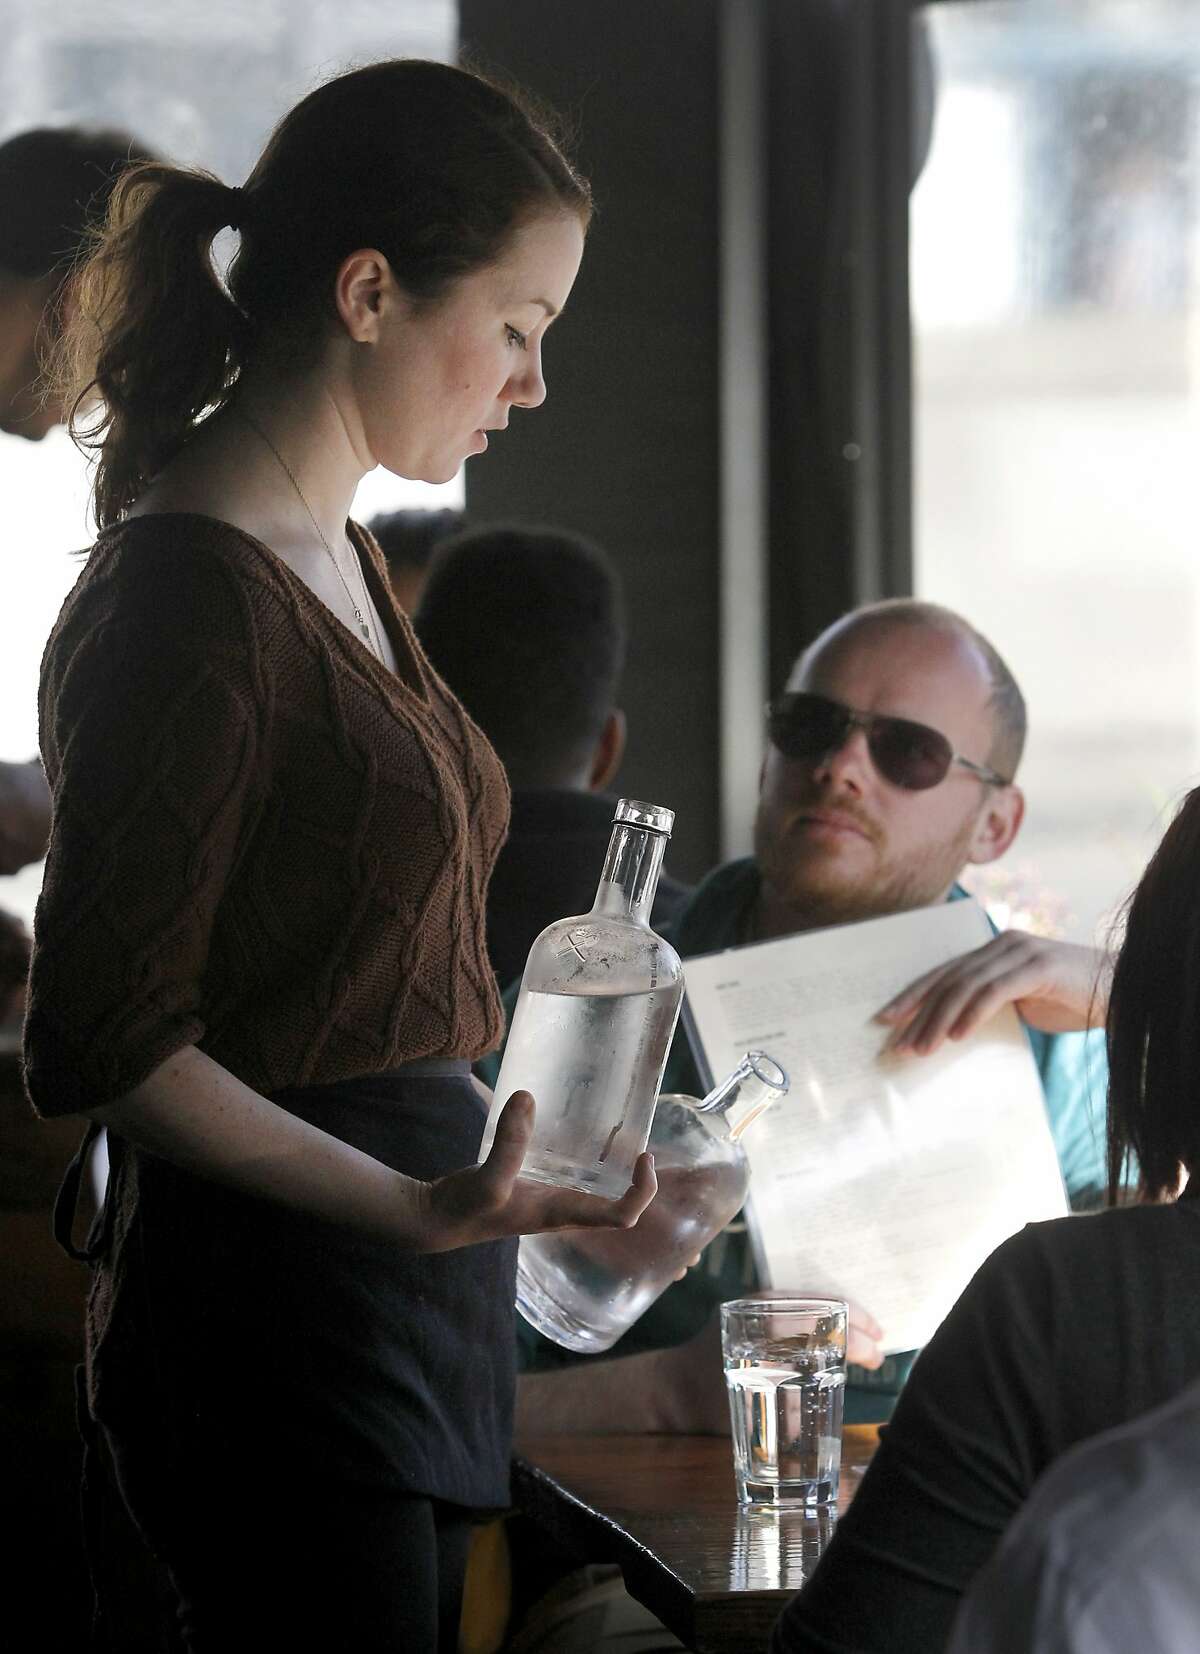 Greta Sanford serves water to Thomas Forss at The Corner Store restaurant in San Francisco, Calif. on Thursday, March 12, 2015. Proposed statewide conservation rules would require restaurants to ask customers if they would like water before serving it.